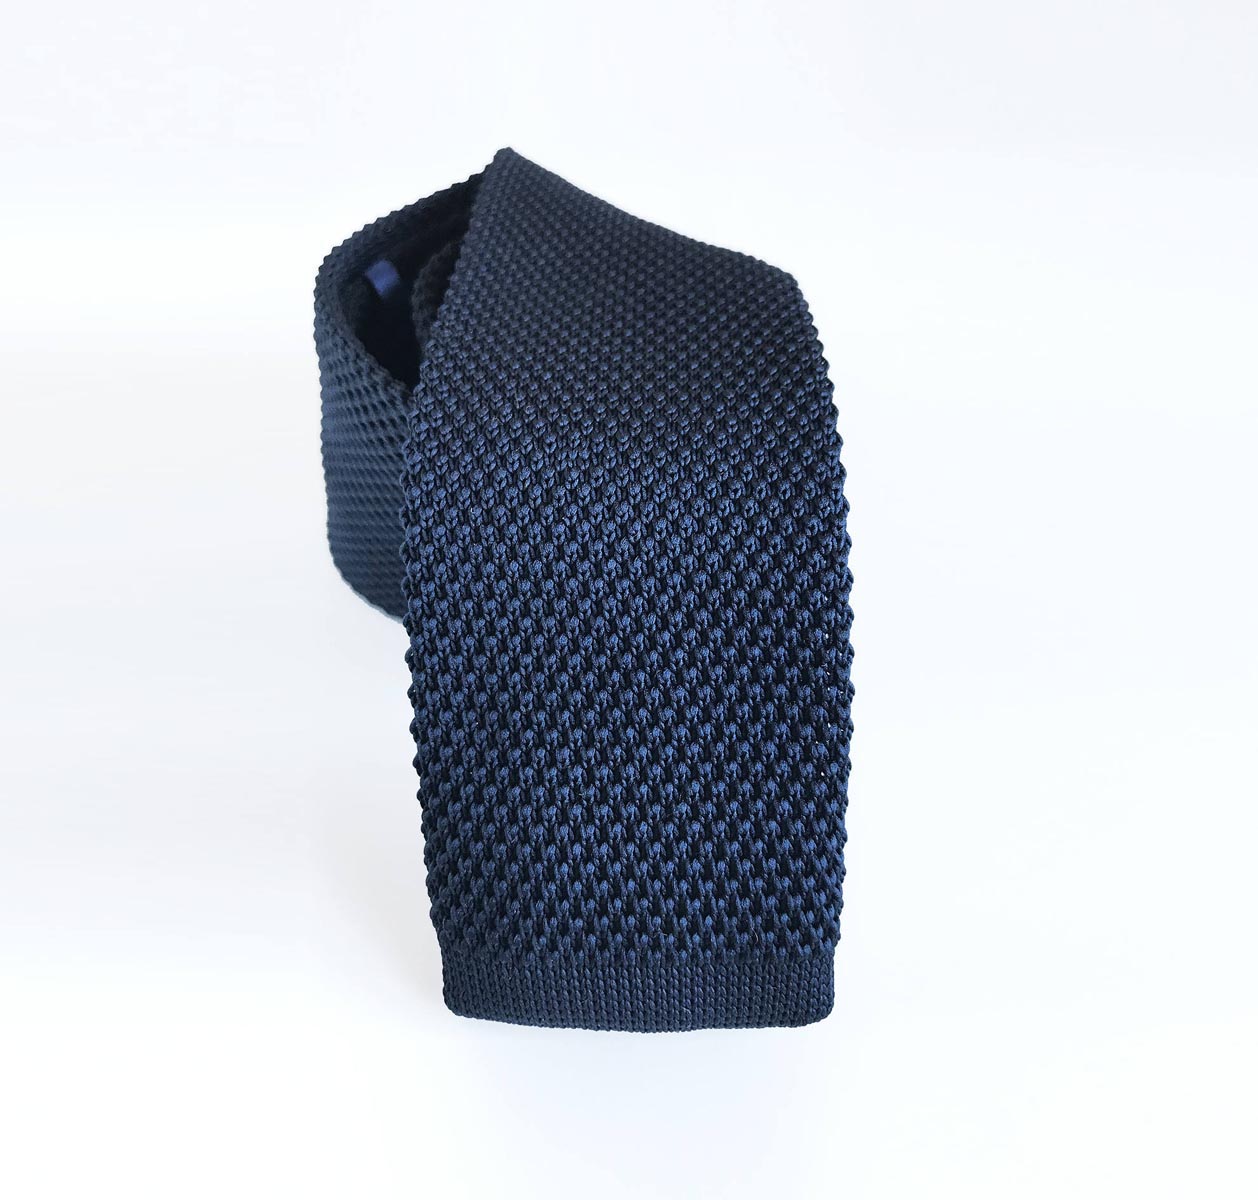 Knitted Navy Tie Stripes Ties Striped Oliverbainbridge - Hobby Fusion ...